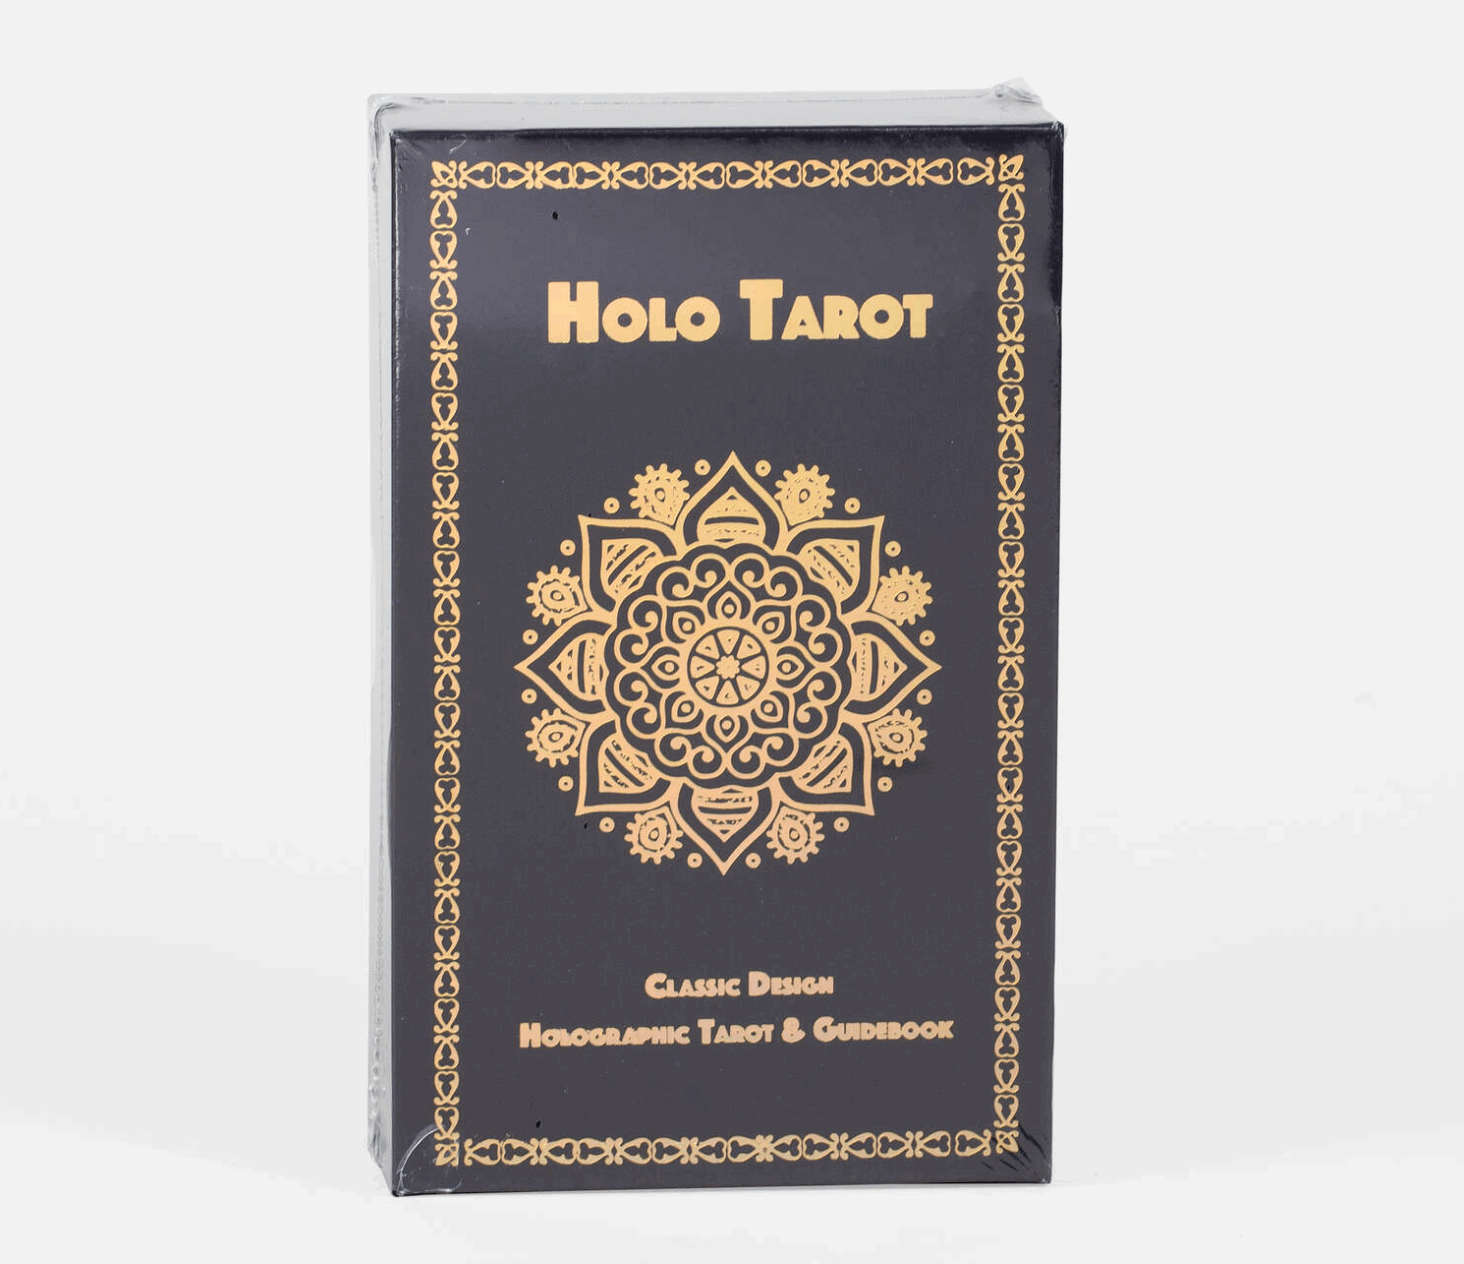 Holo Tarot | Holographic Tarot Deck & Guide | Made in USA |